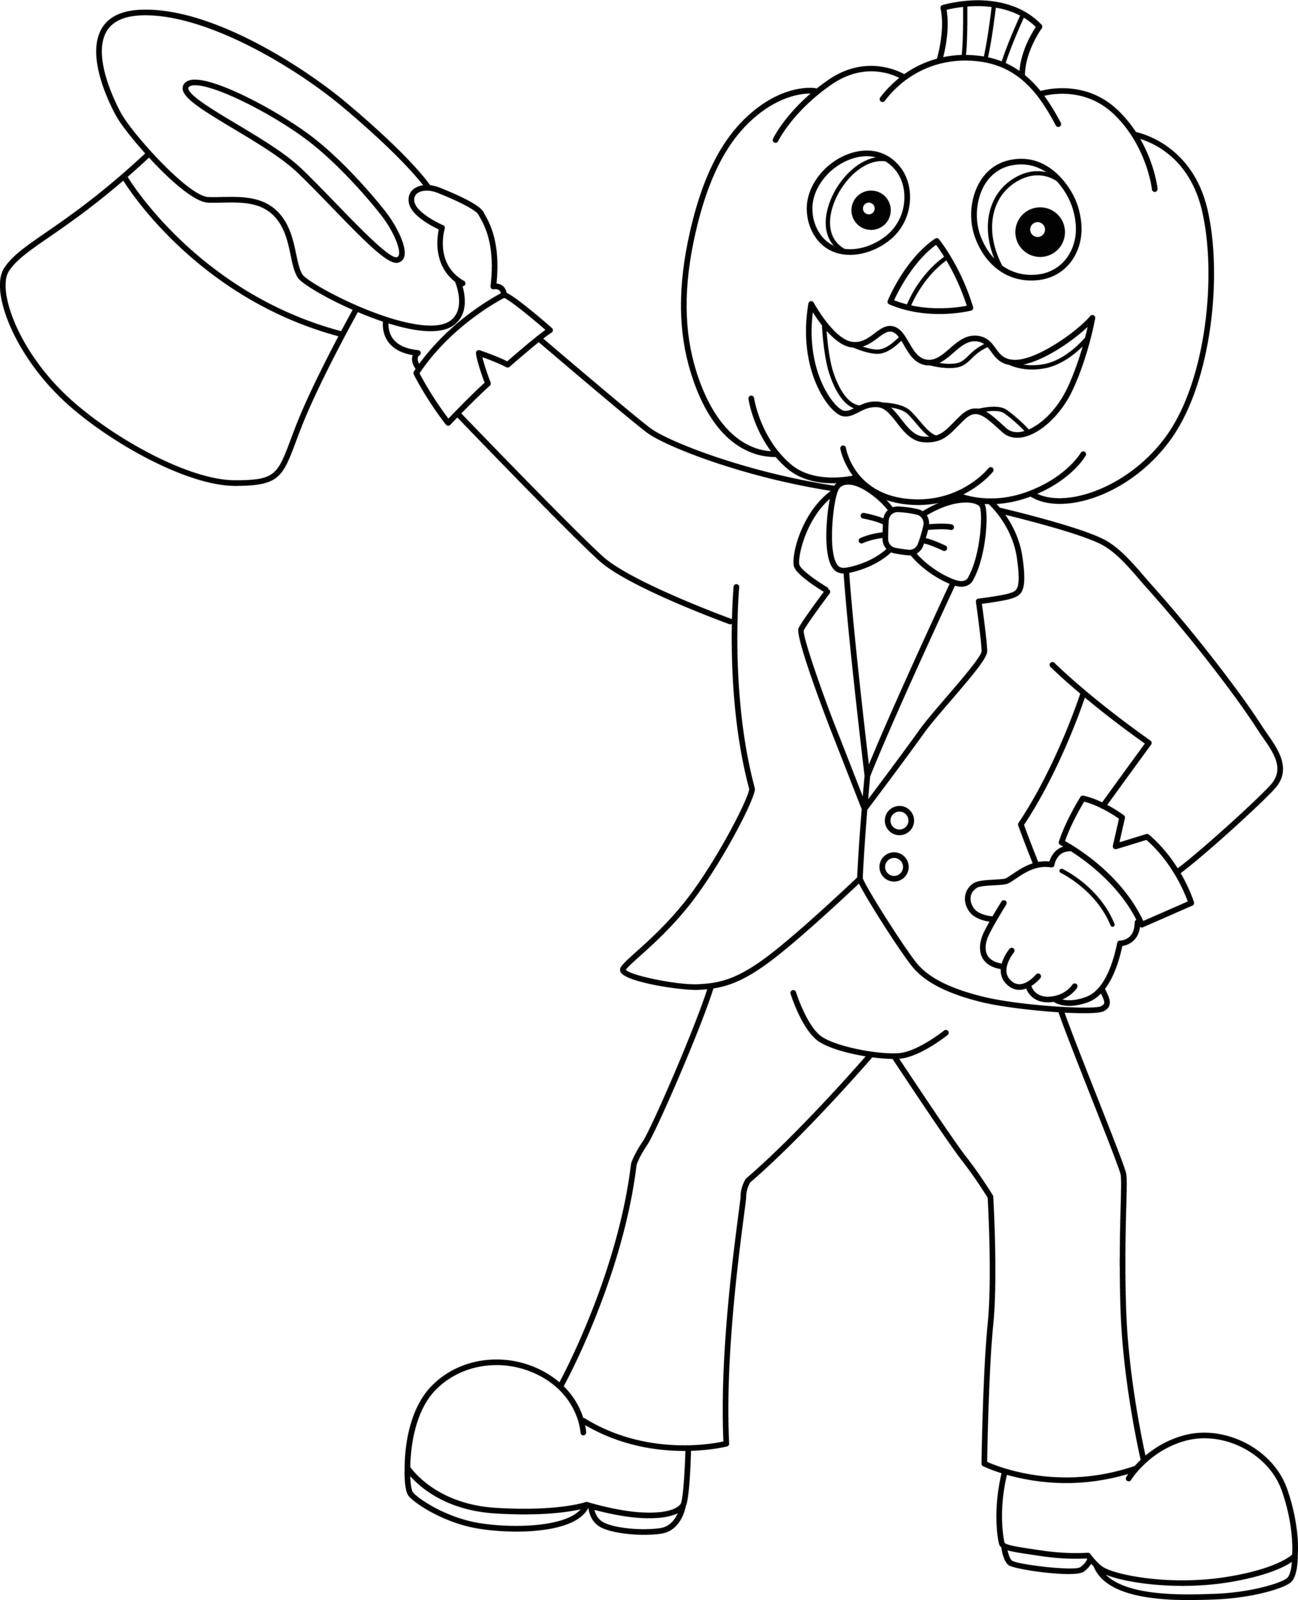 A cute and funny coloring page of a pumpkin headman. Provides hours of coloring fun for children. To color, this page is very easy. Suitable for little kids and toddlers.